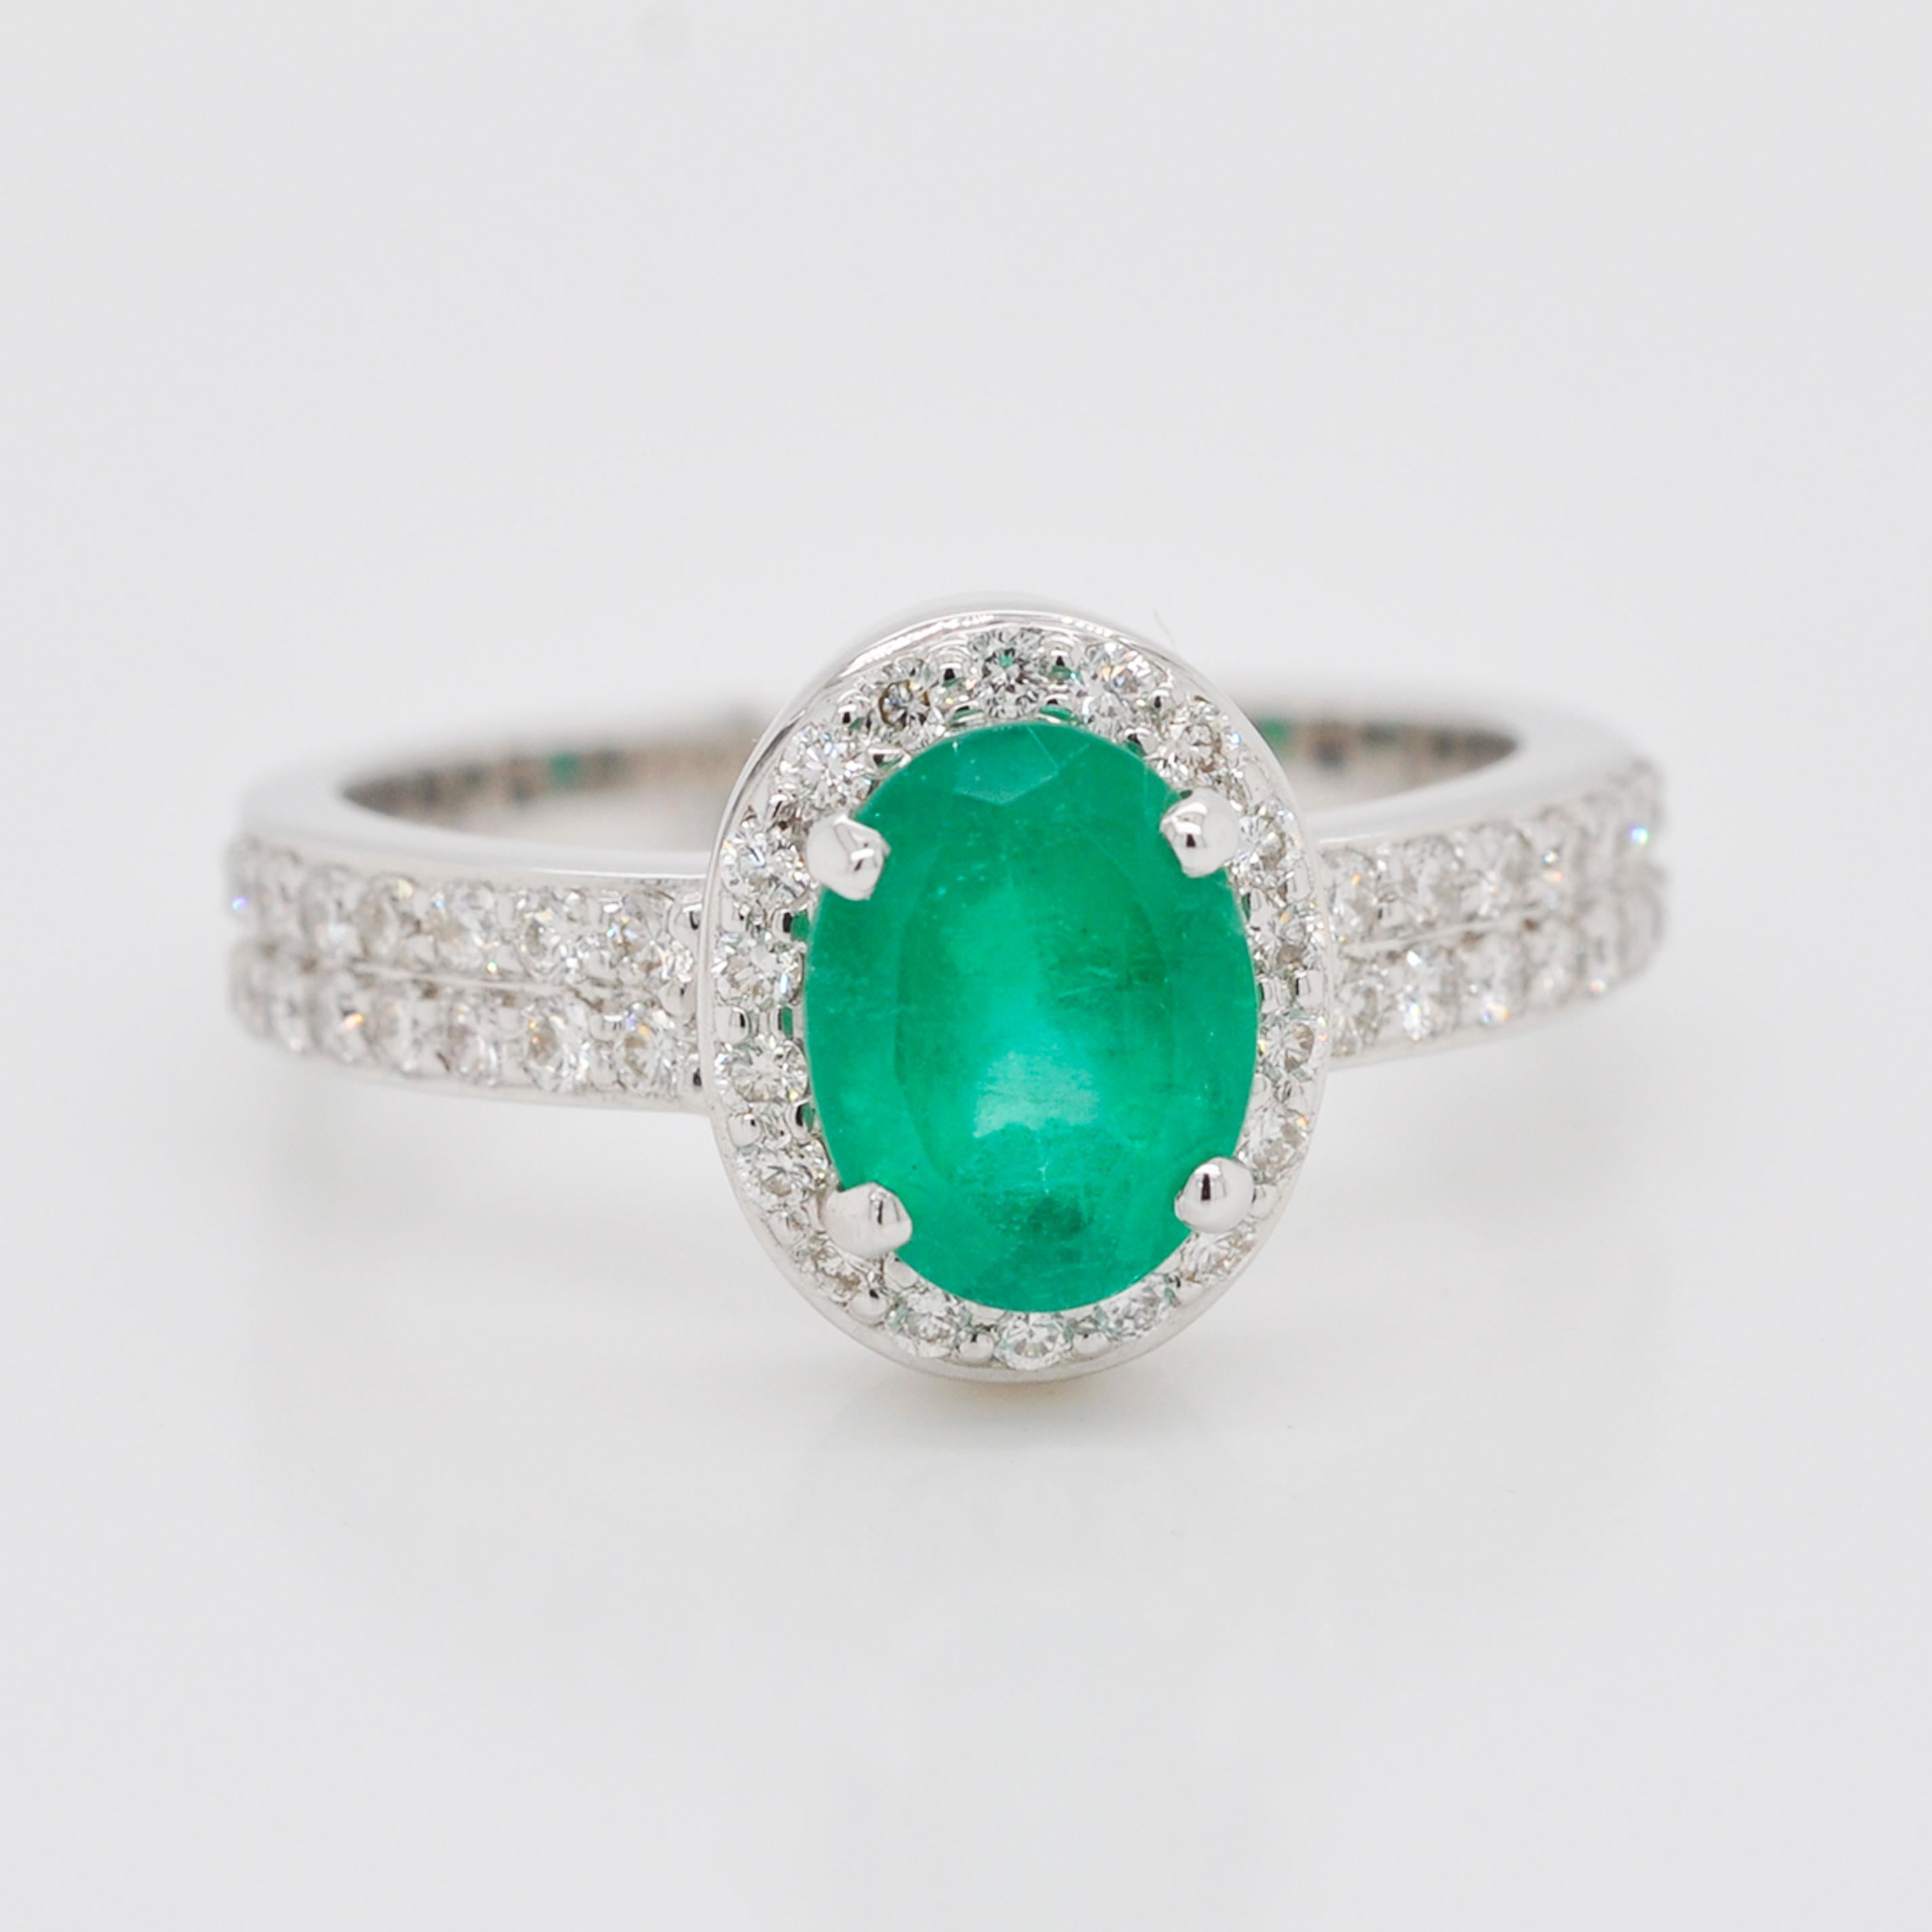 18 Karat White Gold 8.4x6.4 mm Oval Colombian Emerald Diamond Contemporary Ring For Sale 7